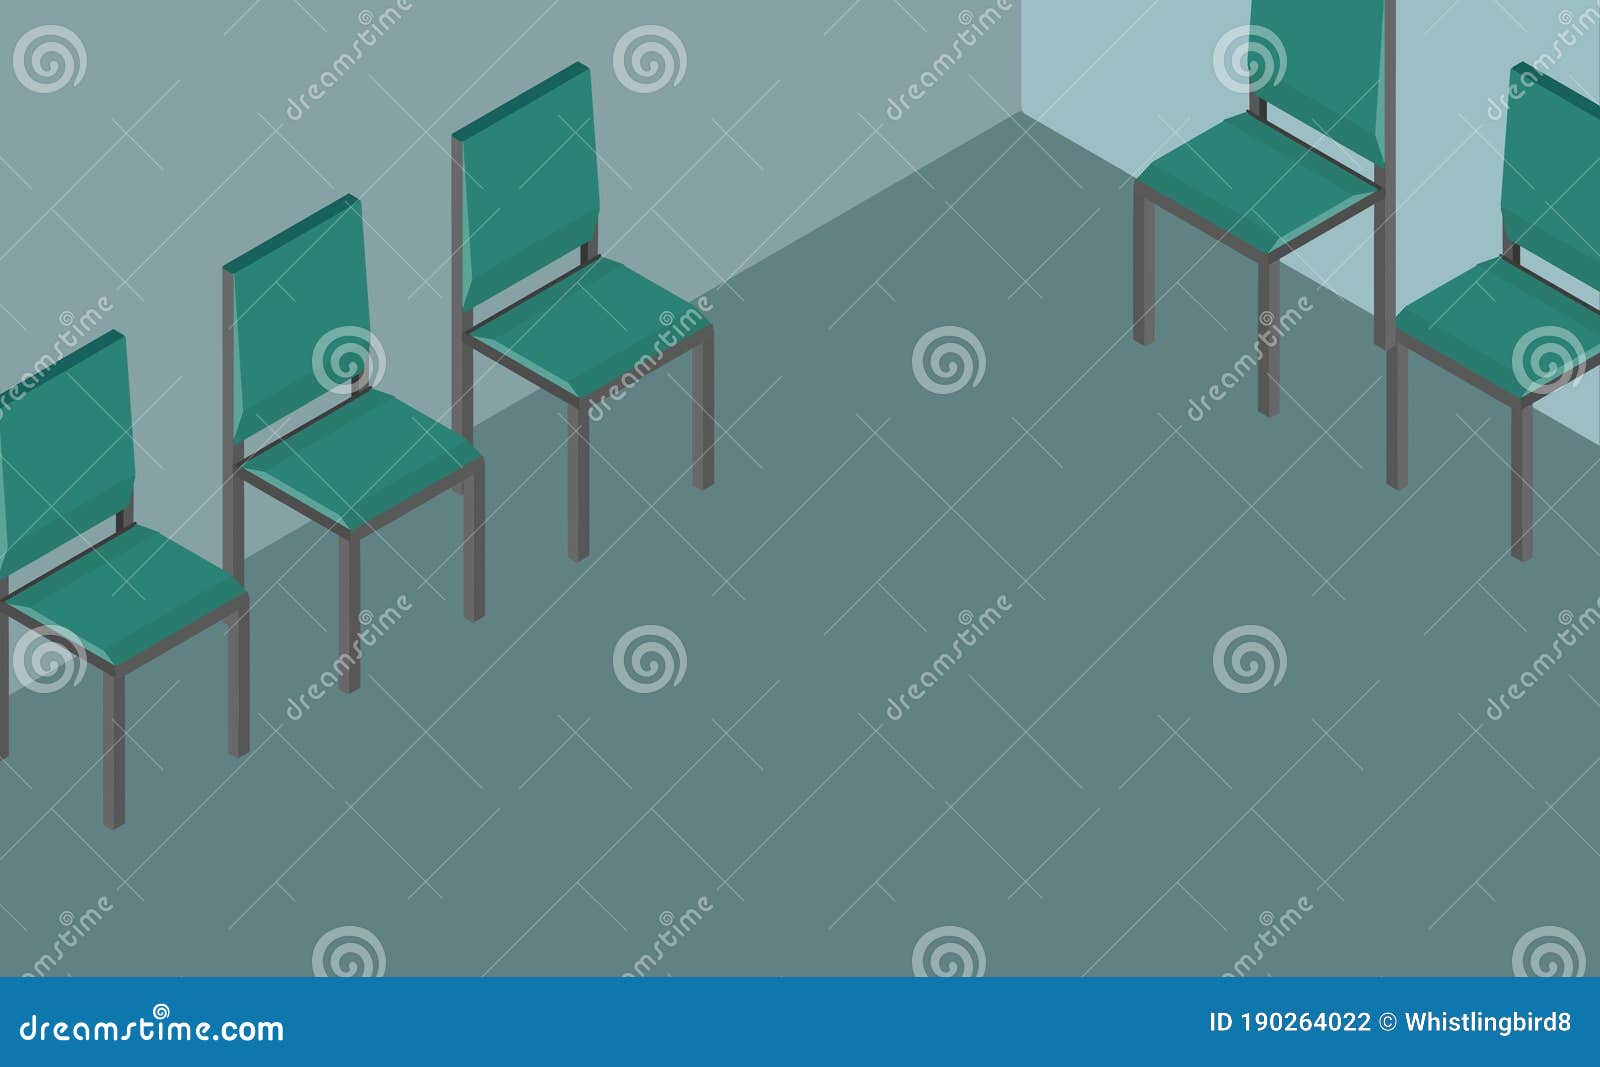 Waiting Room Illustration Chair beside Wall Stock Illustration -  Illustration of wait, cartoon: 190264022